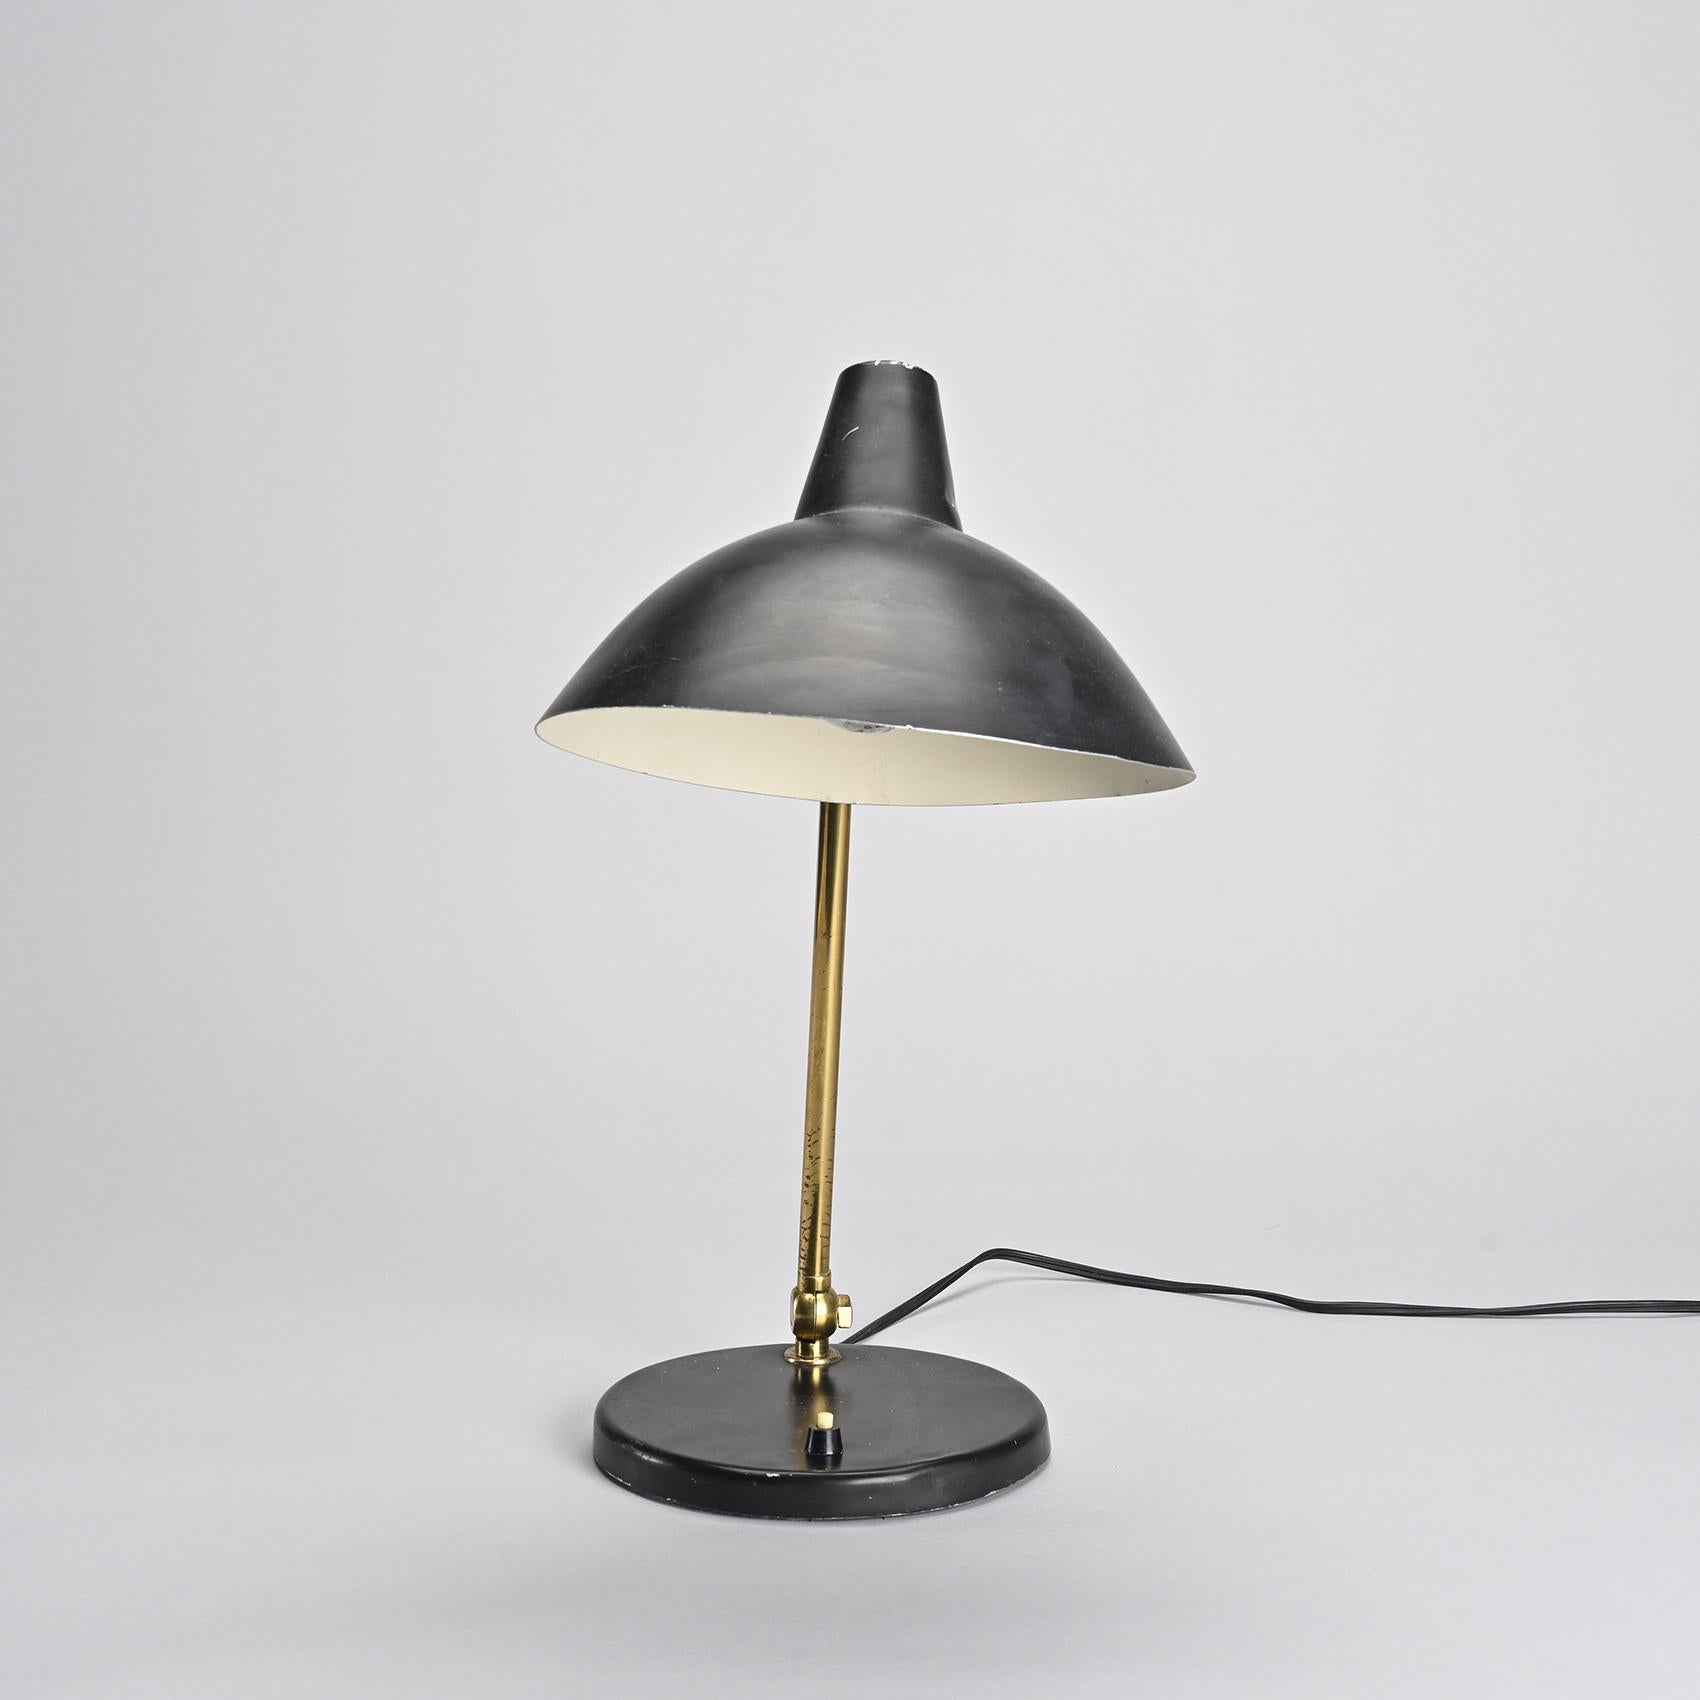 Swiss 1950s Table Lamp by Alfred Muller For Amba